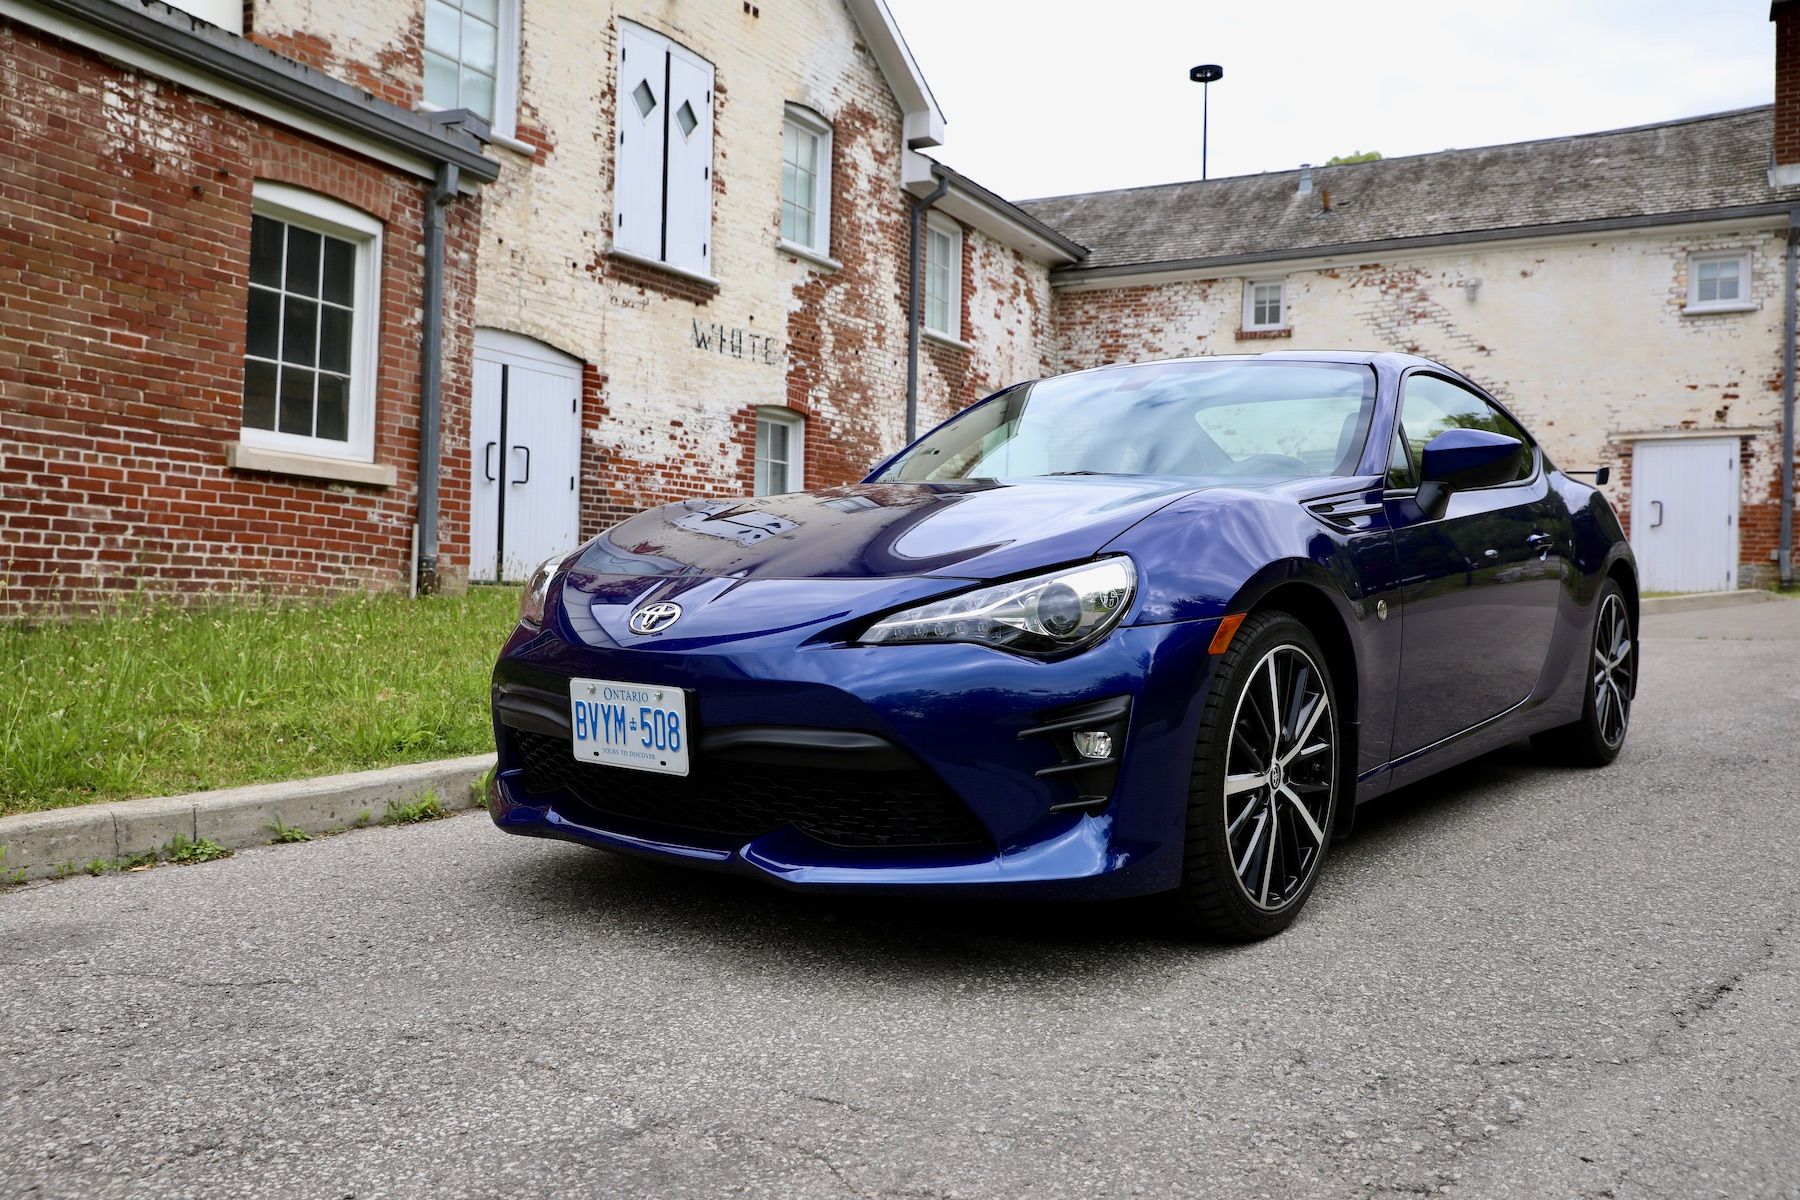 2017 Toyota 86 first drive: Even better than the Scion FR-S